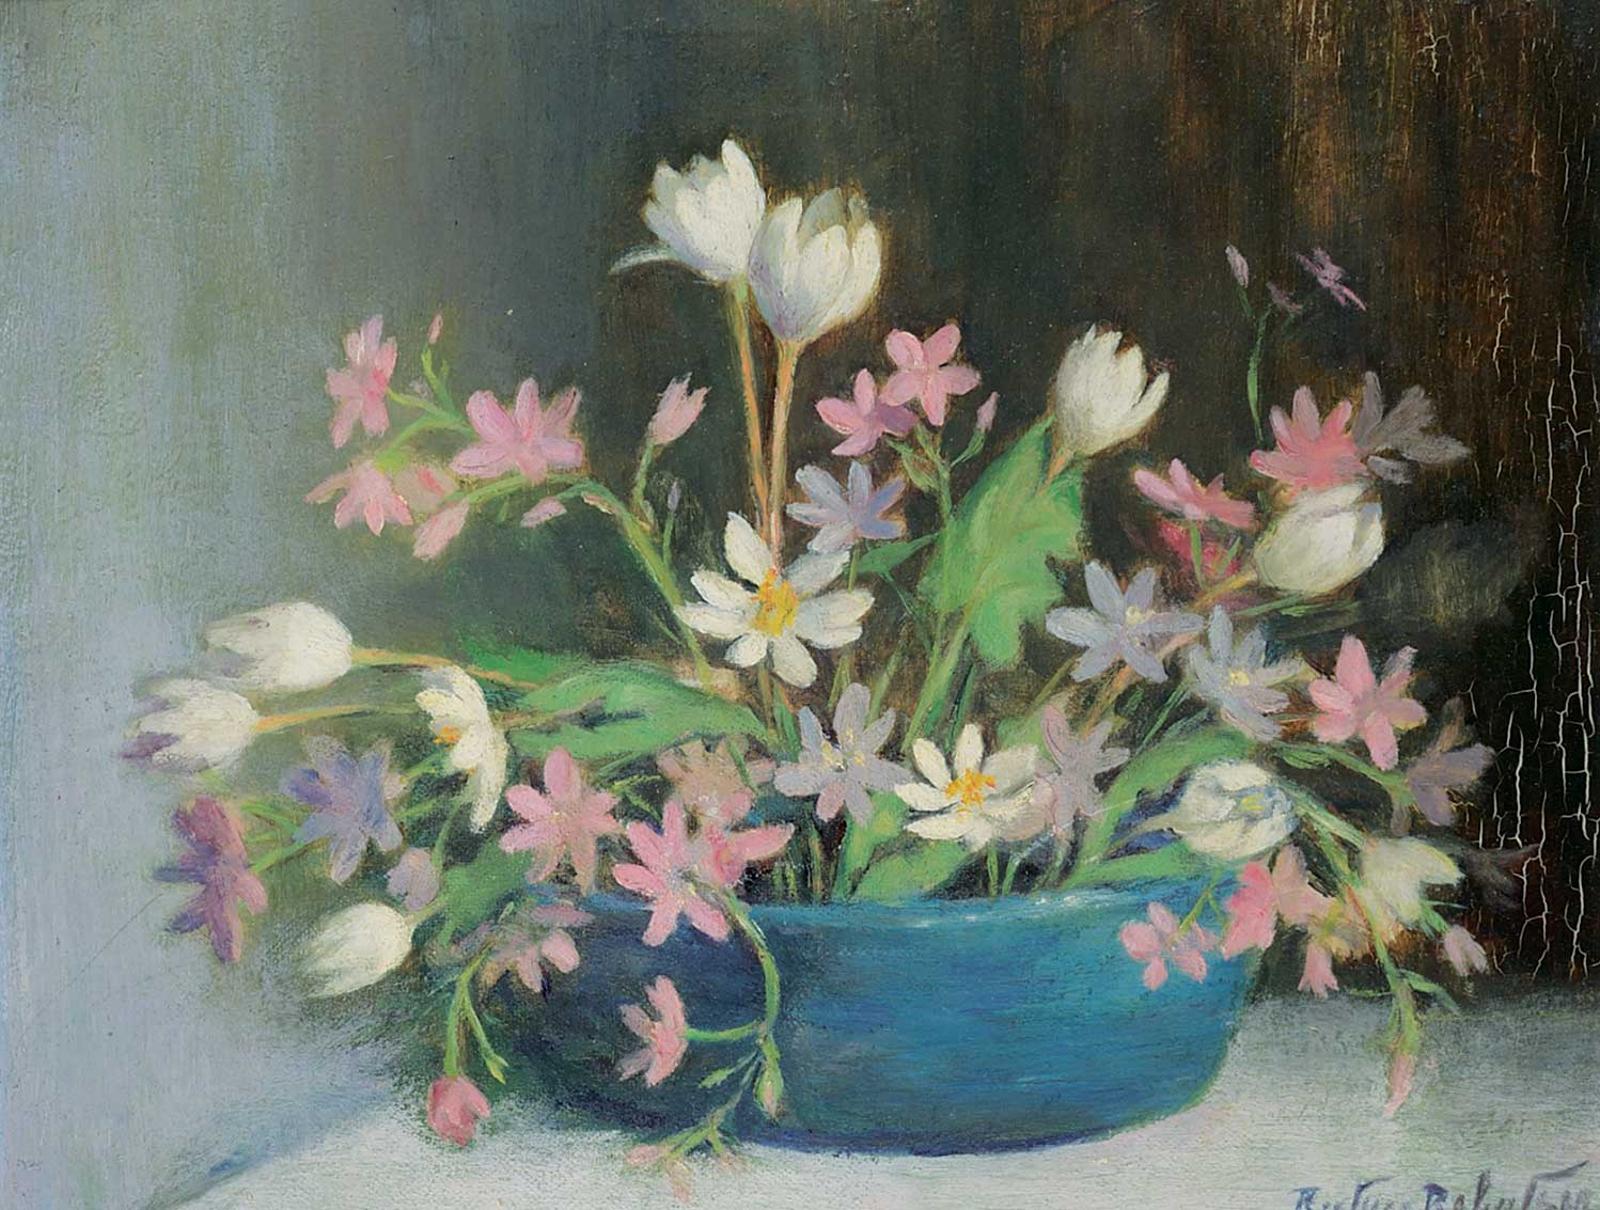 Beatrice Hagarty Robertson (1879-1962) - Untitled - Blue Pot with Spring Flowers